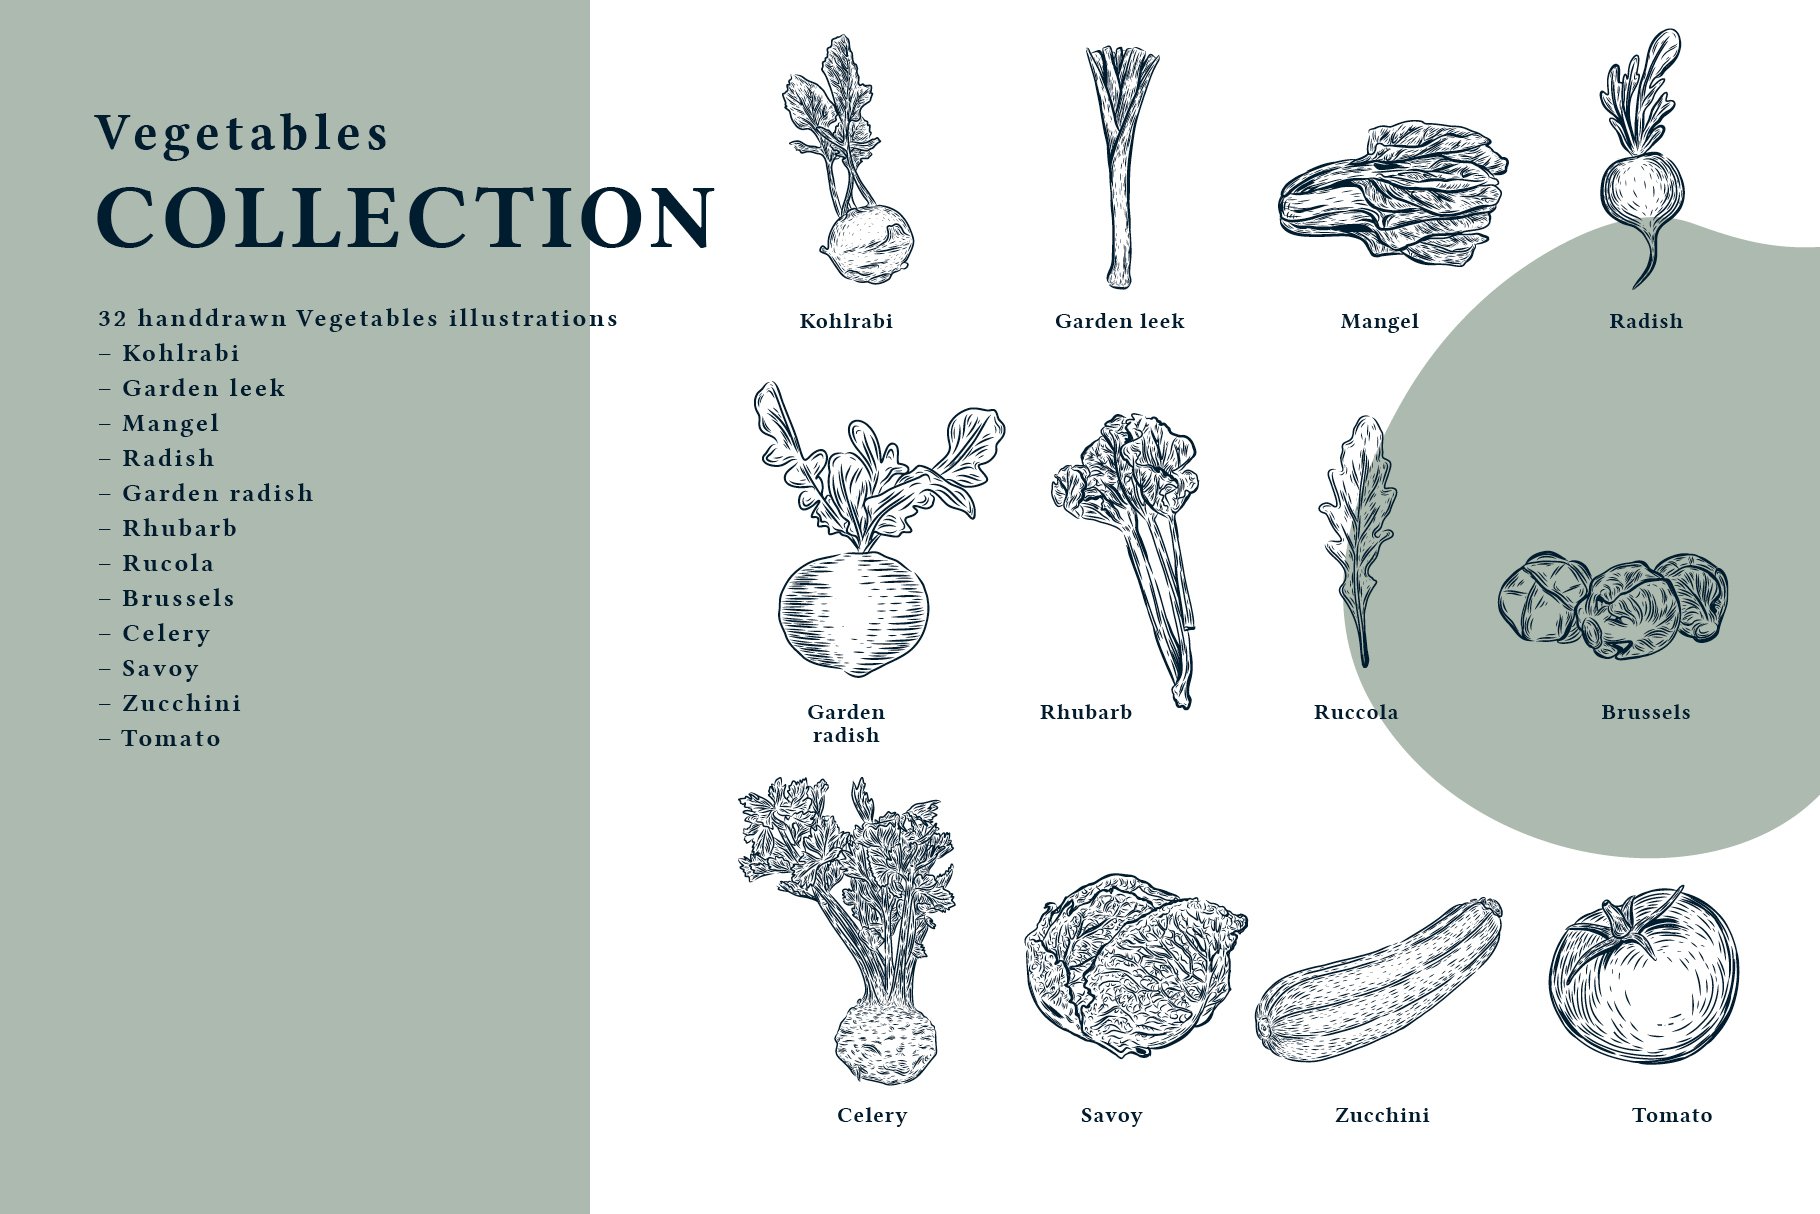 The Vegetables Collection preview image.